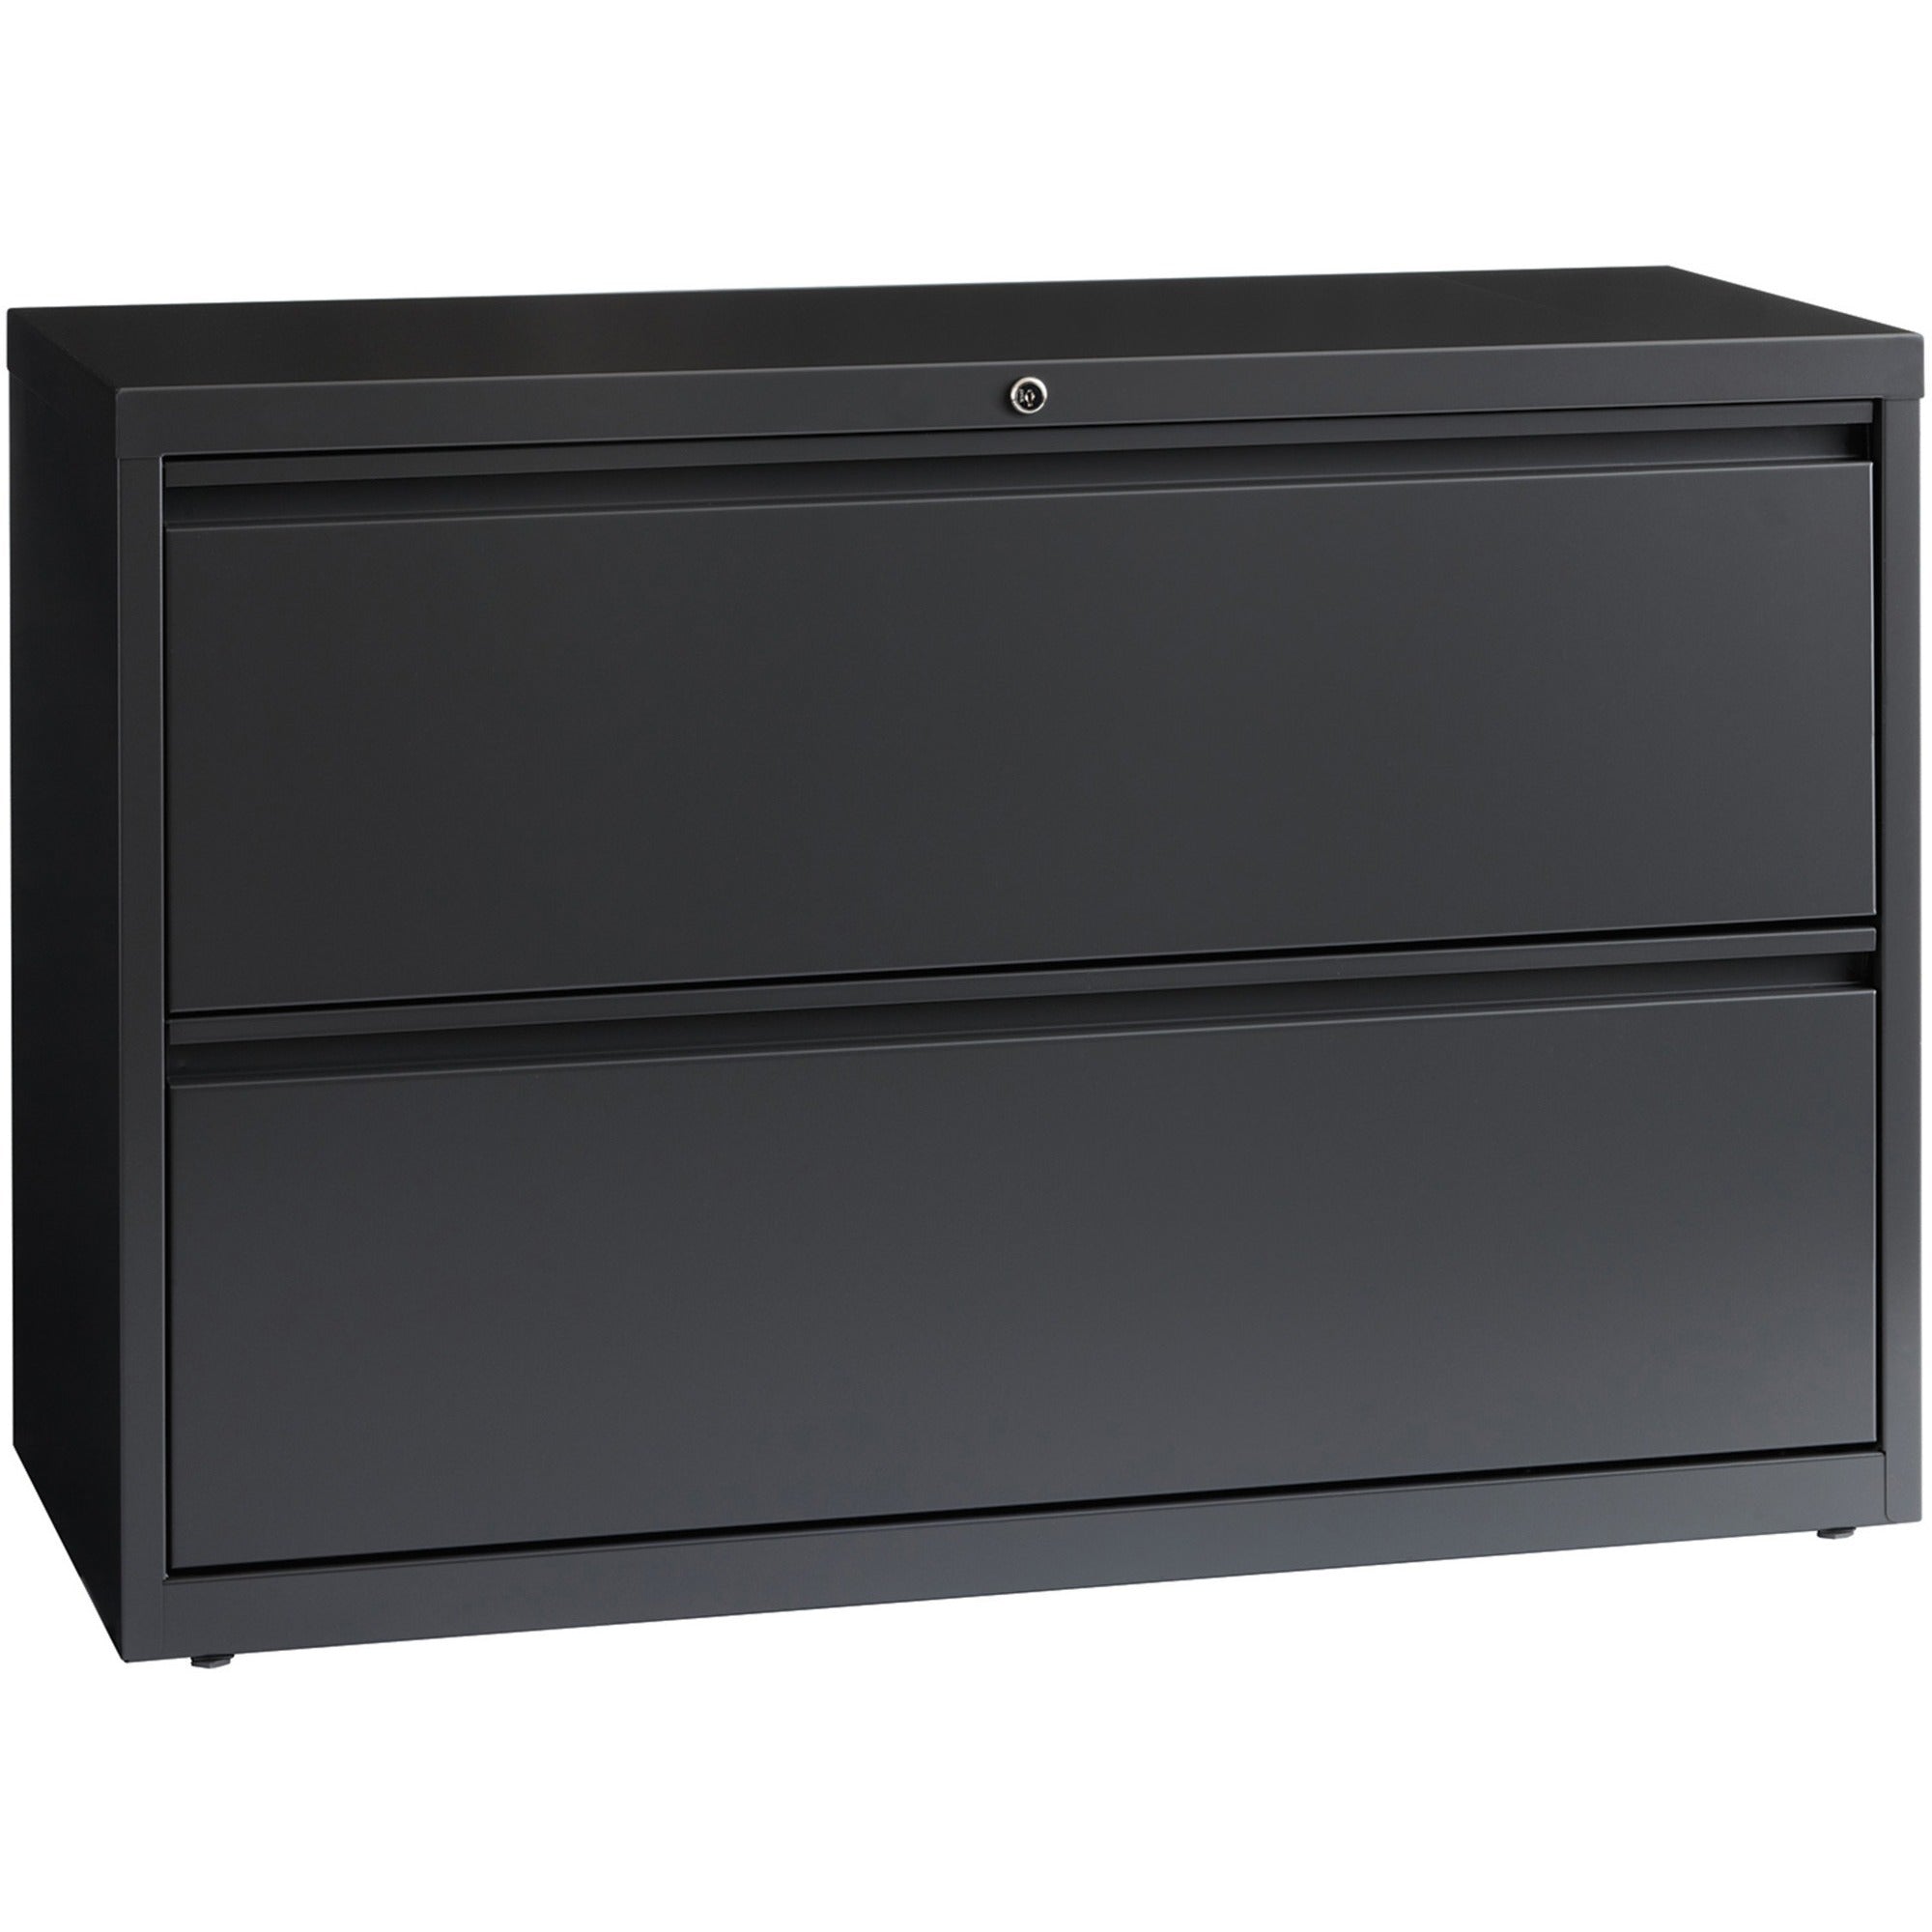 Lorell Fortress Series Lateral File - 42" x 18.6" x 28.1" - 2 x Drawer(s) - Legal, Letter, A4 - Lateral - Rust Proof, Leveling Glide, Interlocking, Ball-bearing Suspension - Charcoal - Baked Enamel - Steel - Recycled - 